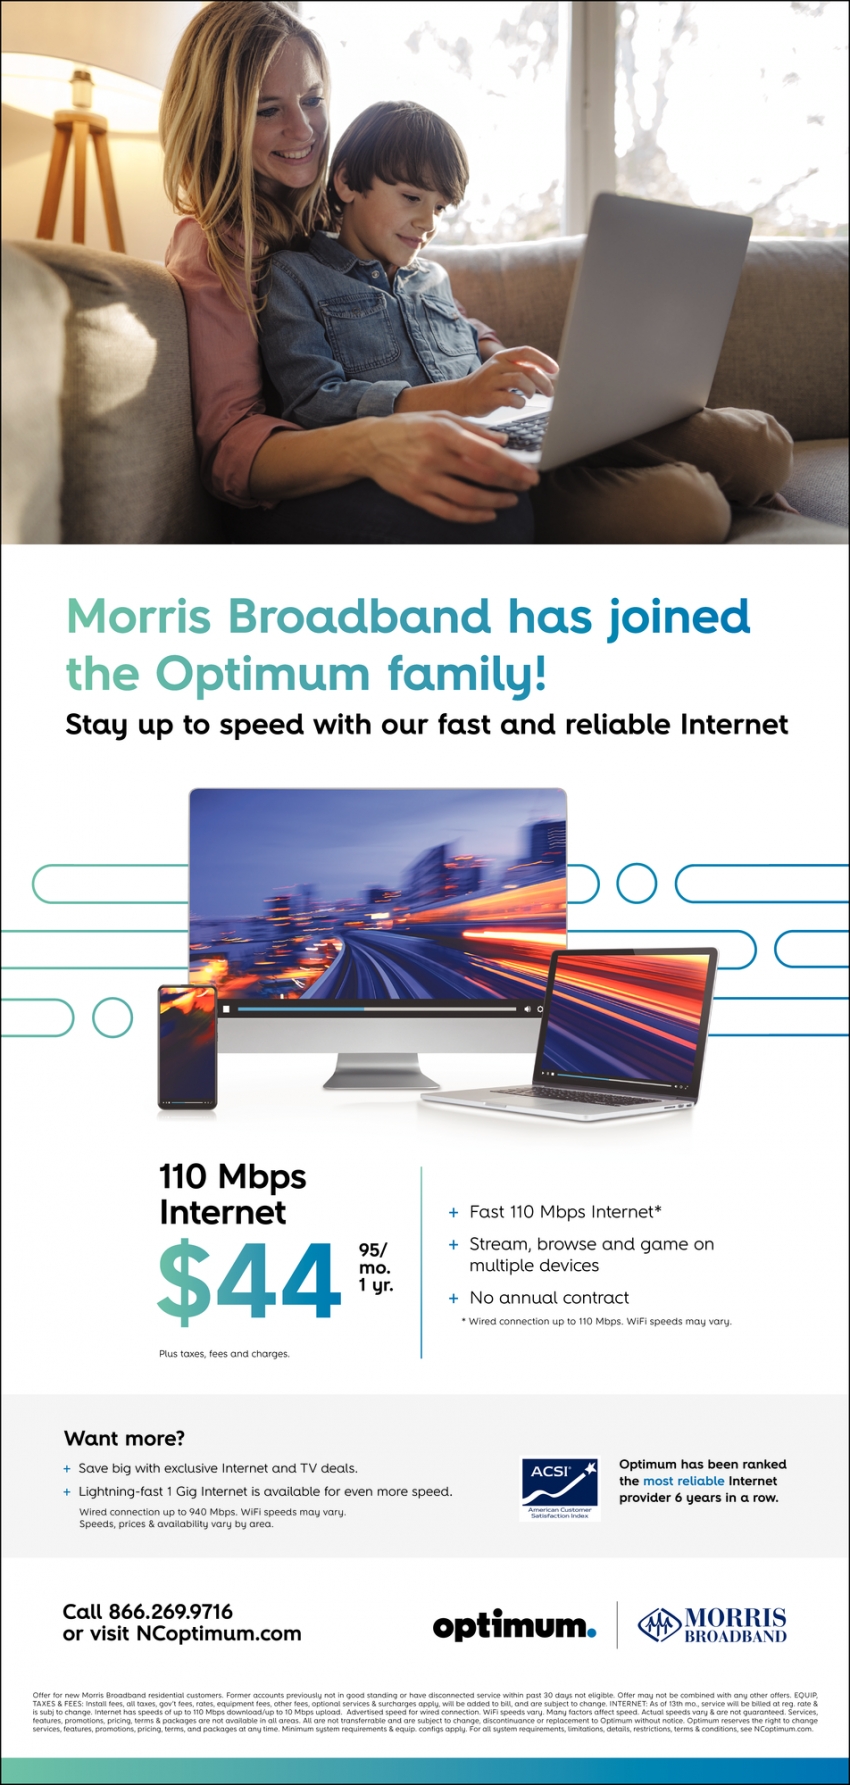 Stay Up to Speed with Our Fast and Reliable Internet